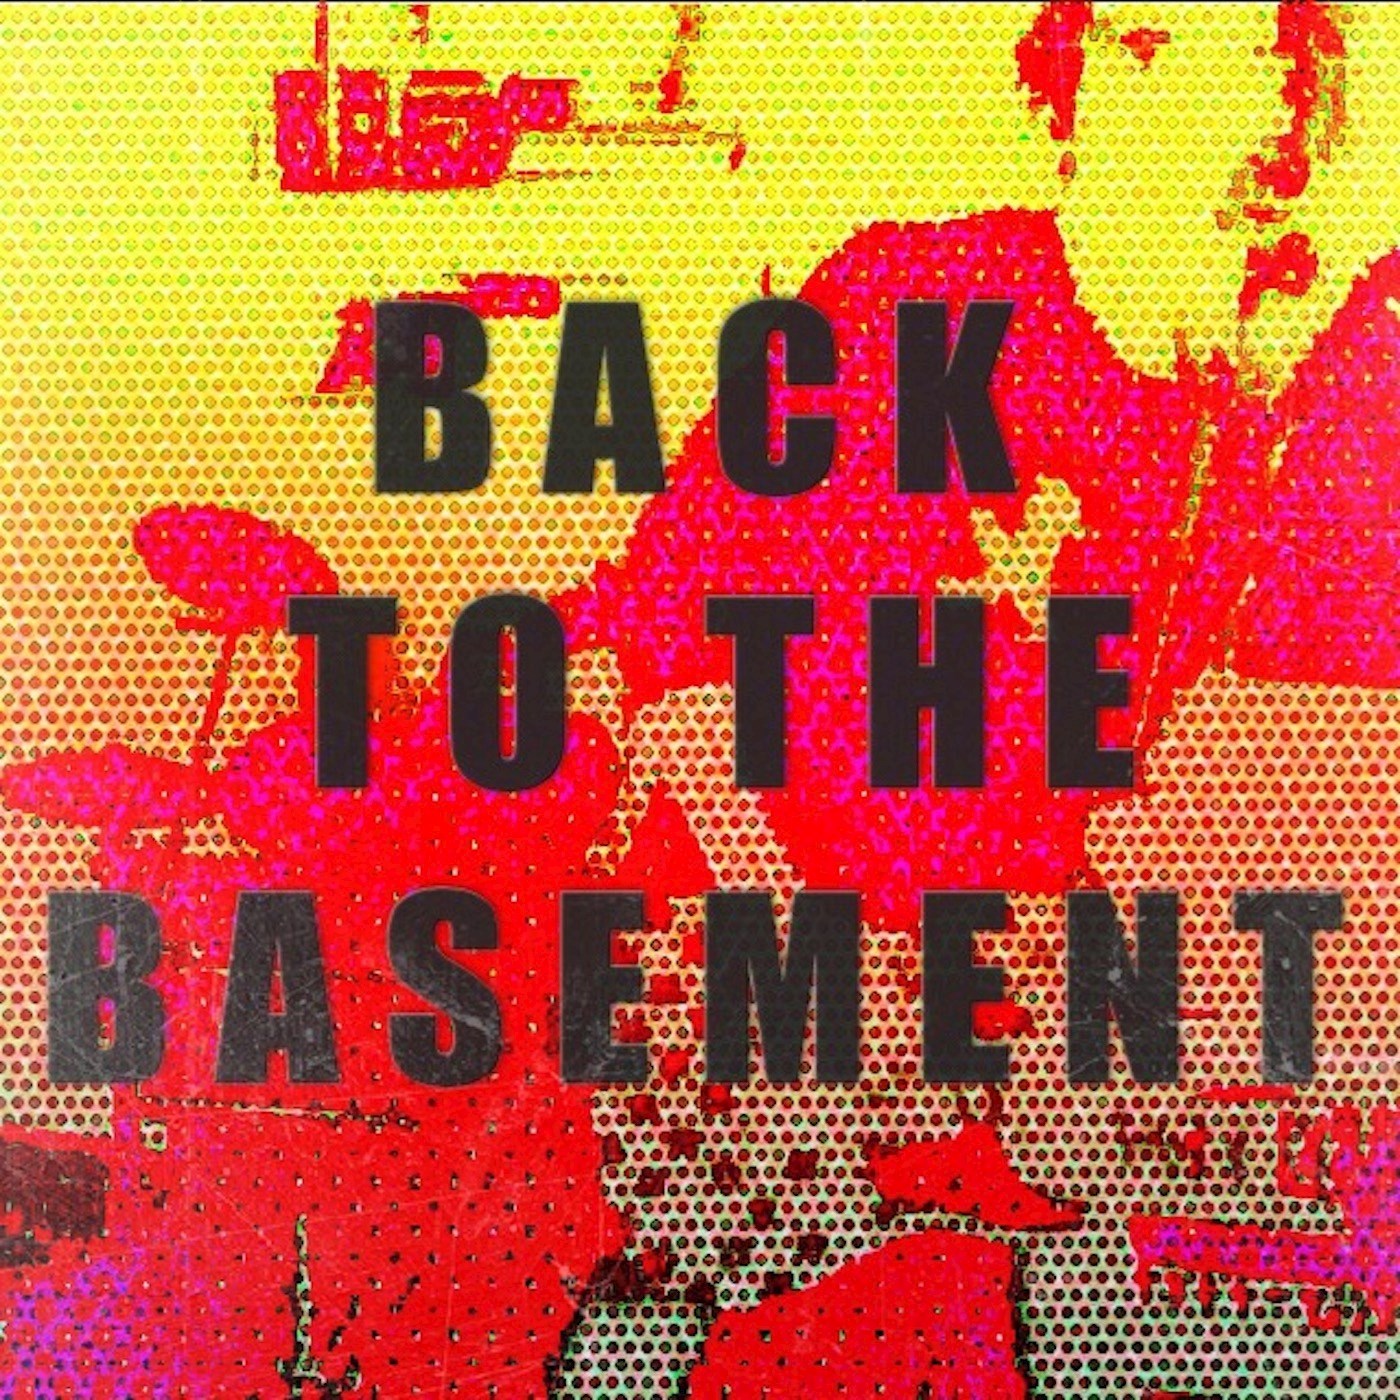 Back to the Basement